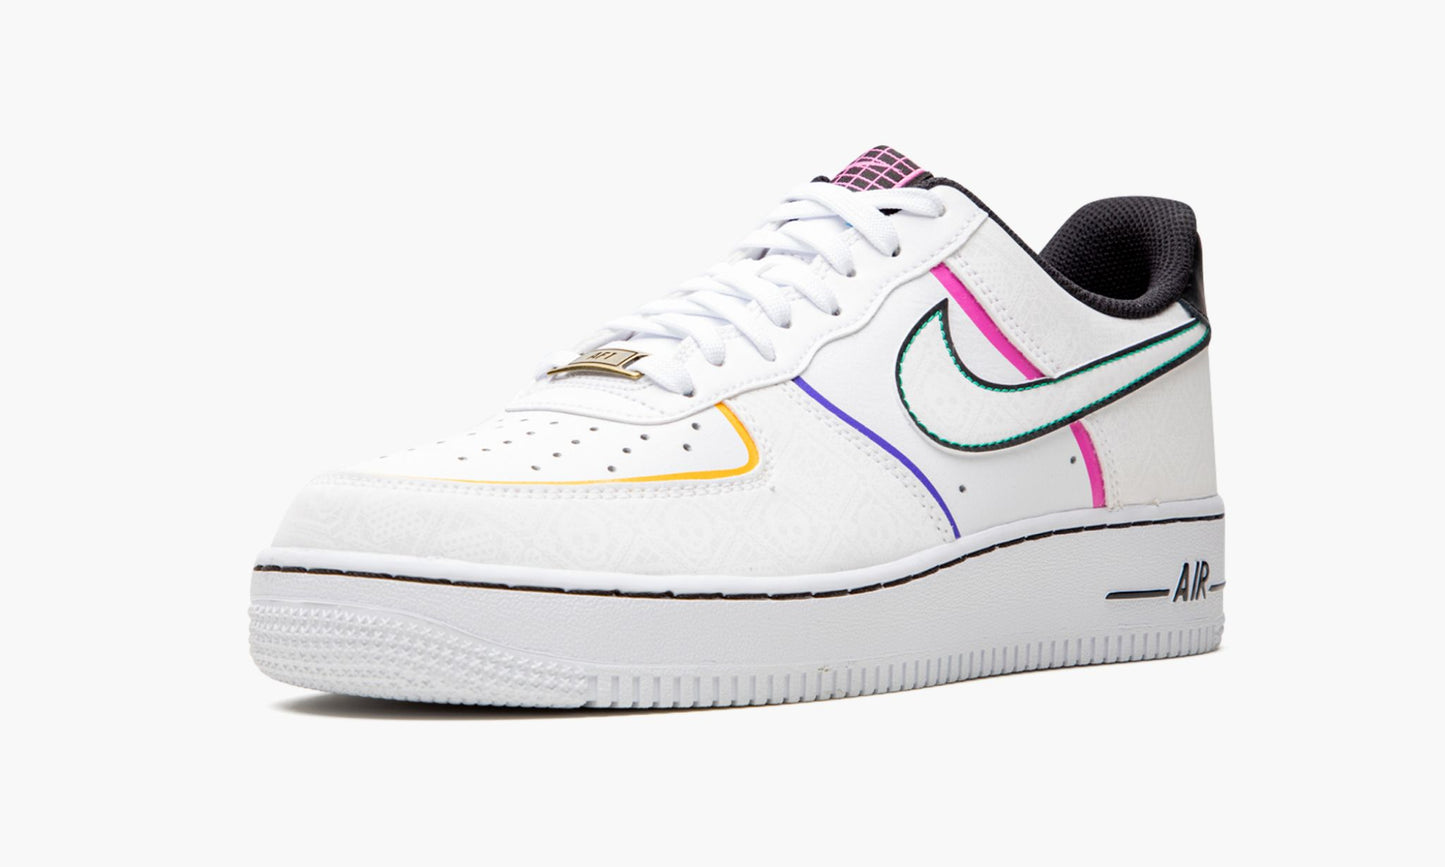 Air Force 1 '07 PRM "Day of the Dead"